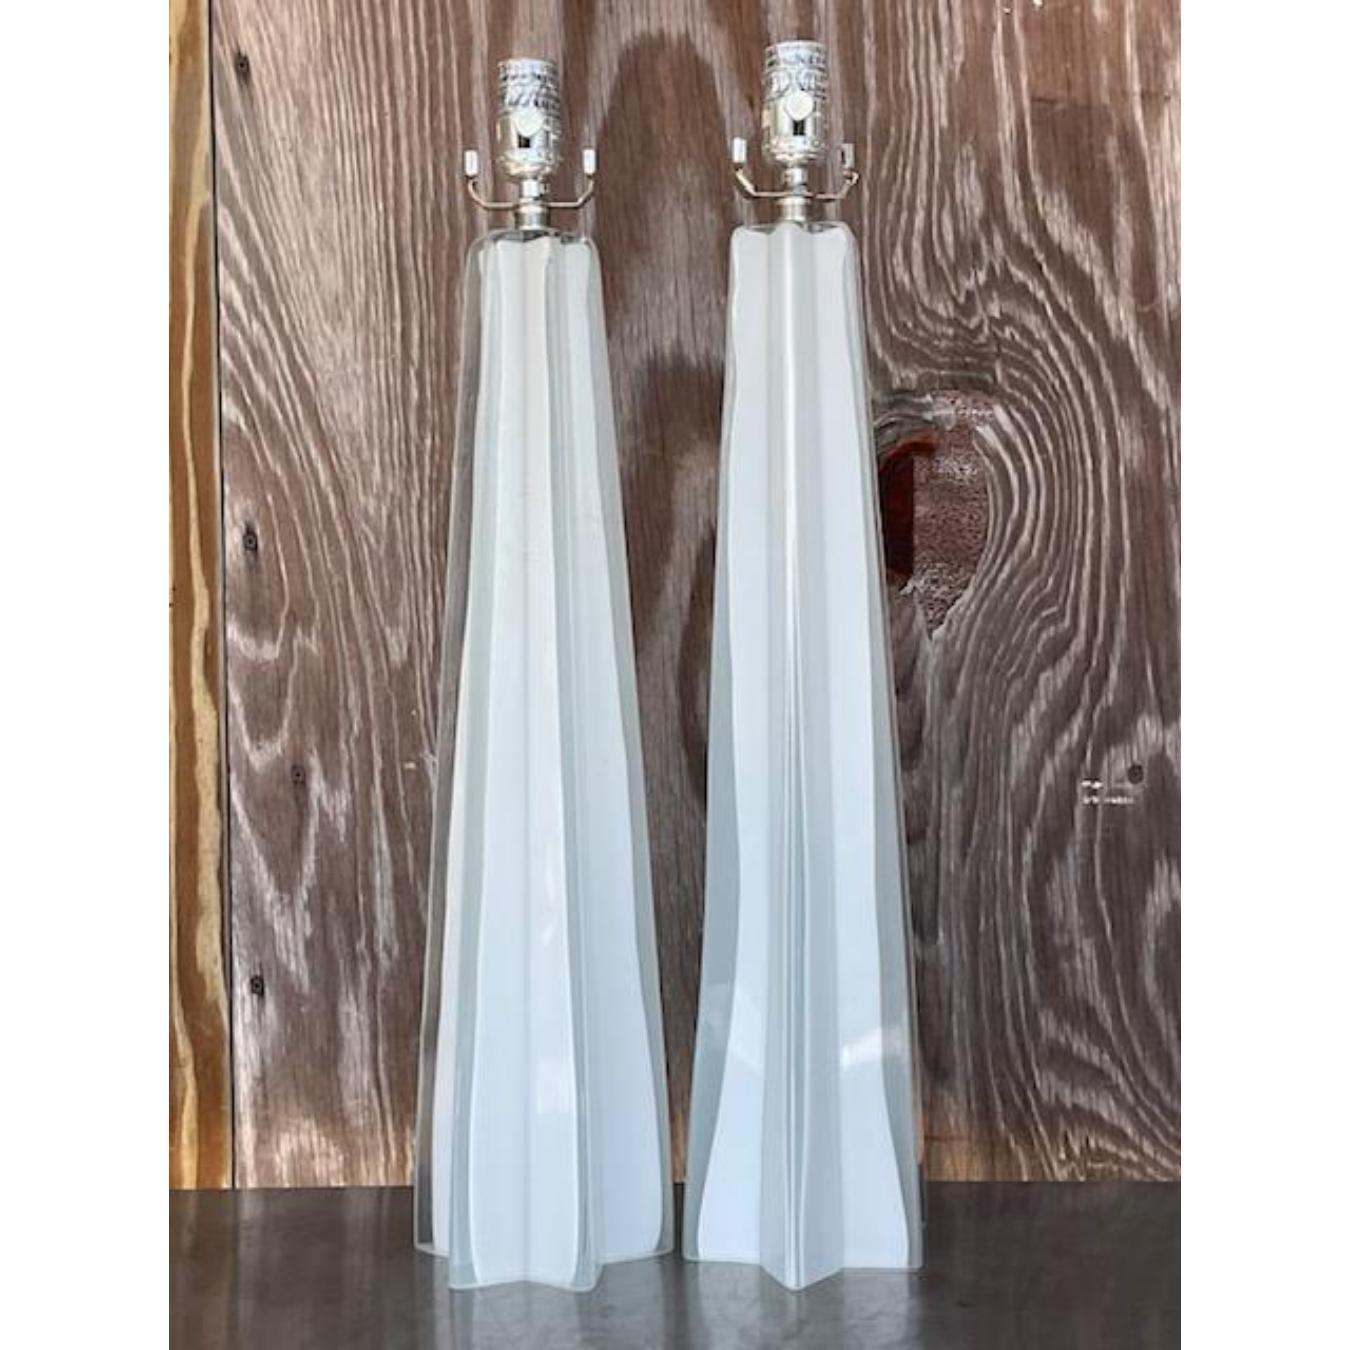 A fabulous pair of vintage Contemporary table lamps. A chic star shape in glass with a painted white interior. Tall and striking. Acquired from a Palm Beach estate.